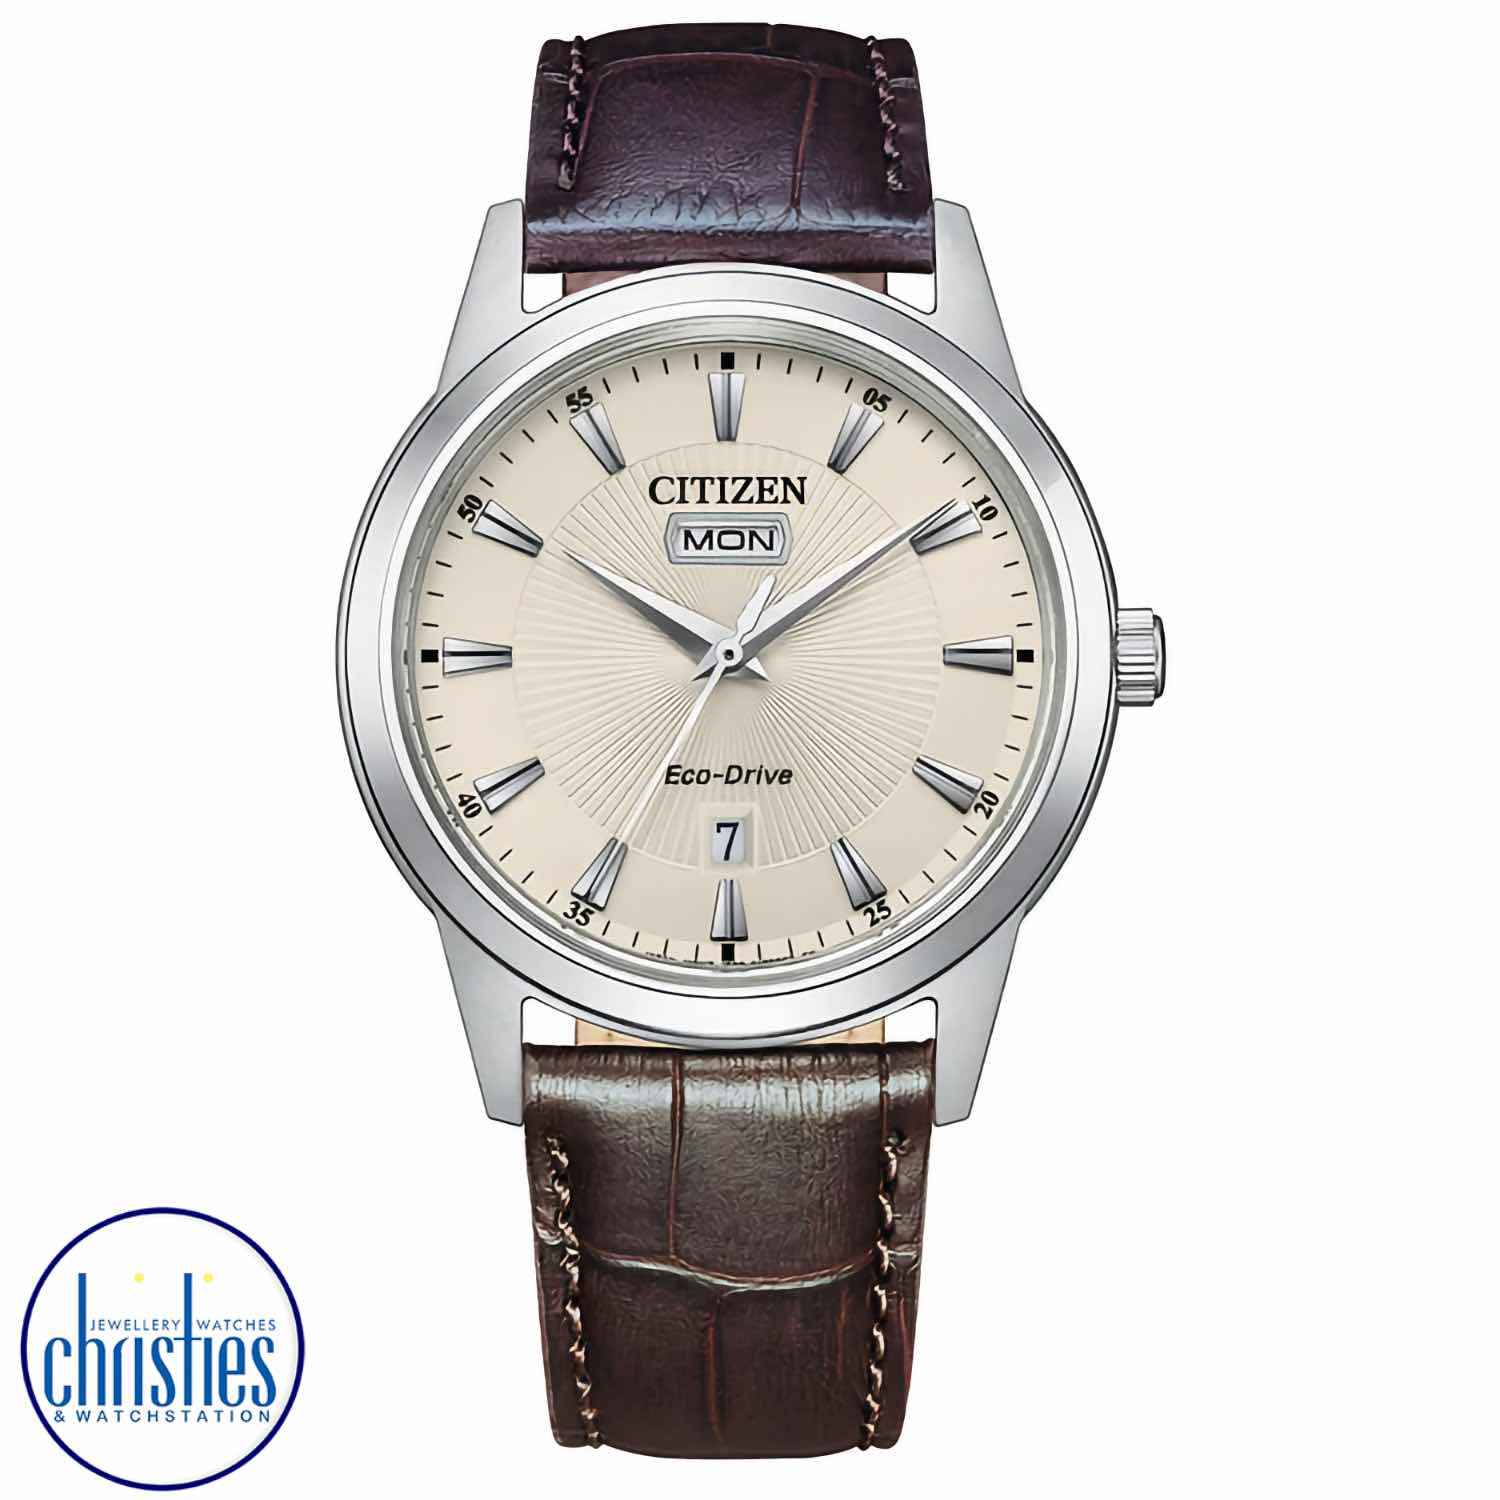 AW0100-19A CITIZEN Eco-Drive Watch. A modern timepiece that displays classic aesthetic appeal.